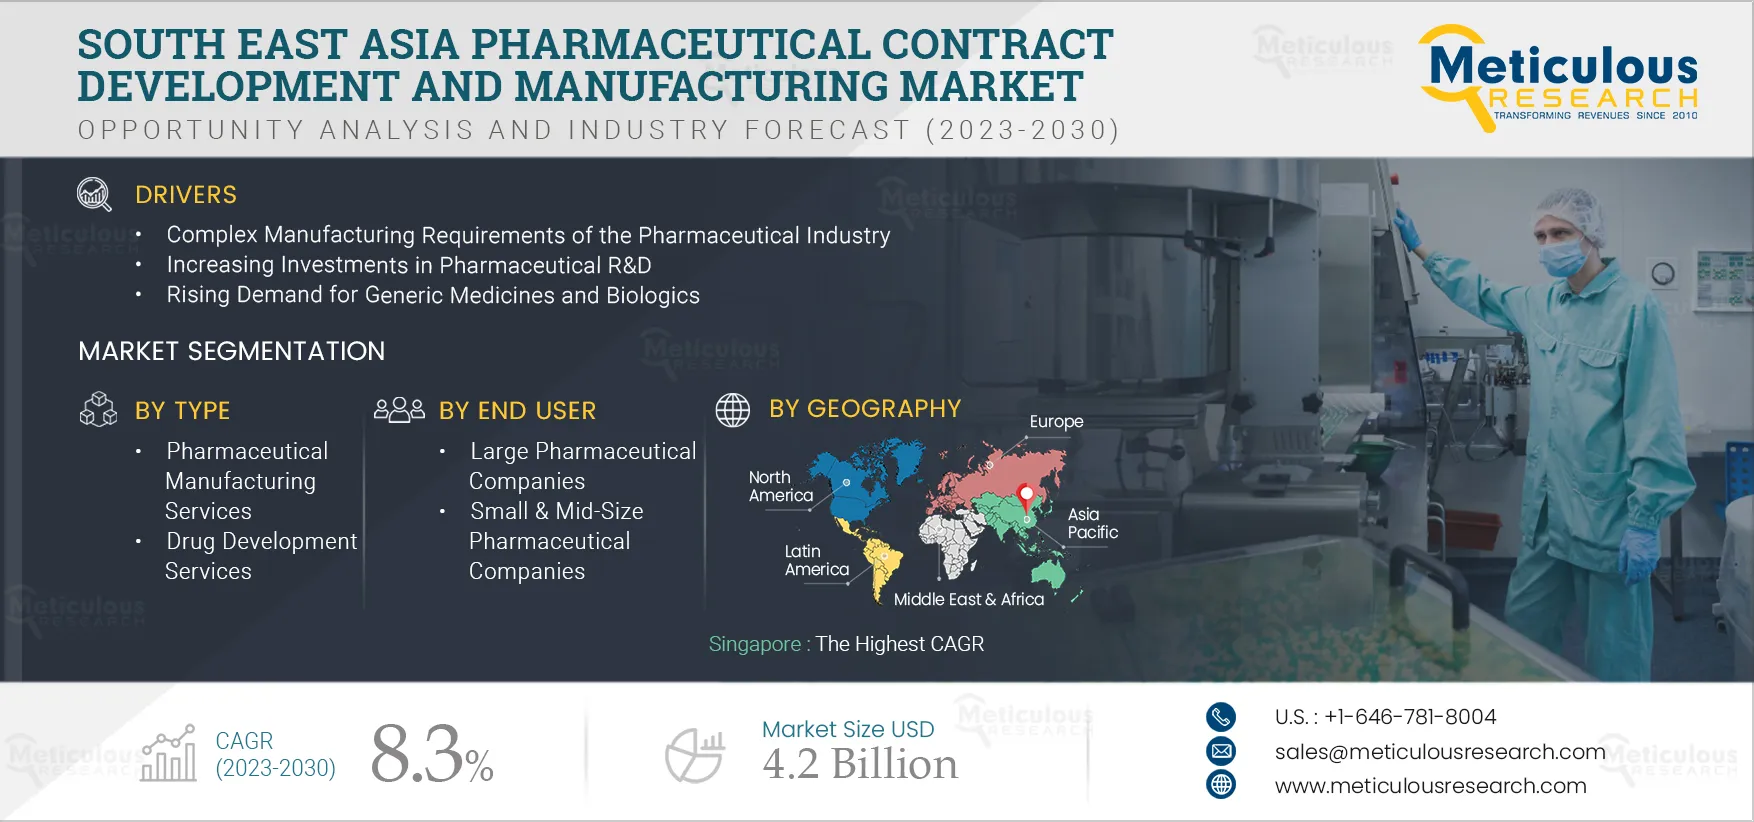 South East Asia Pharmaceutical Contract Development and Manufacturing Market